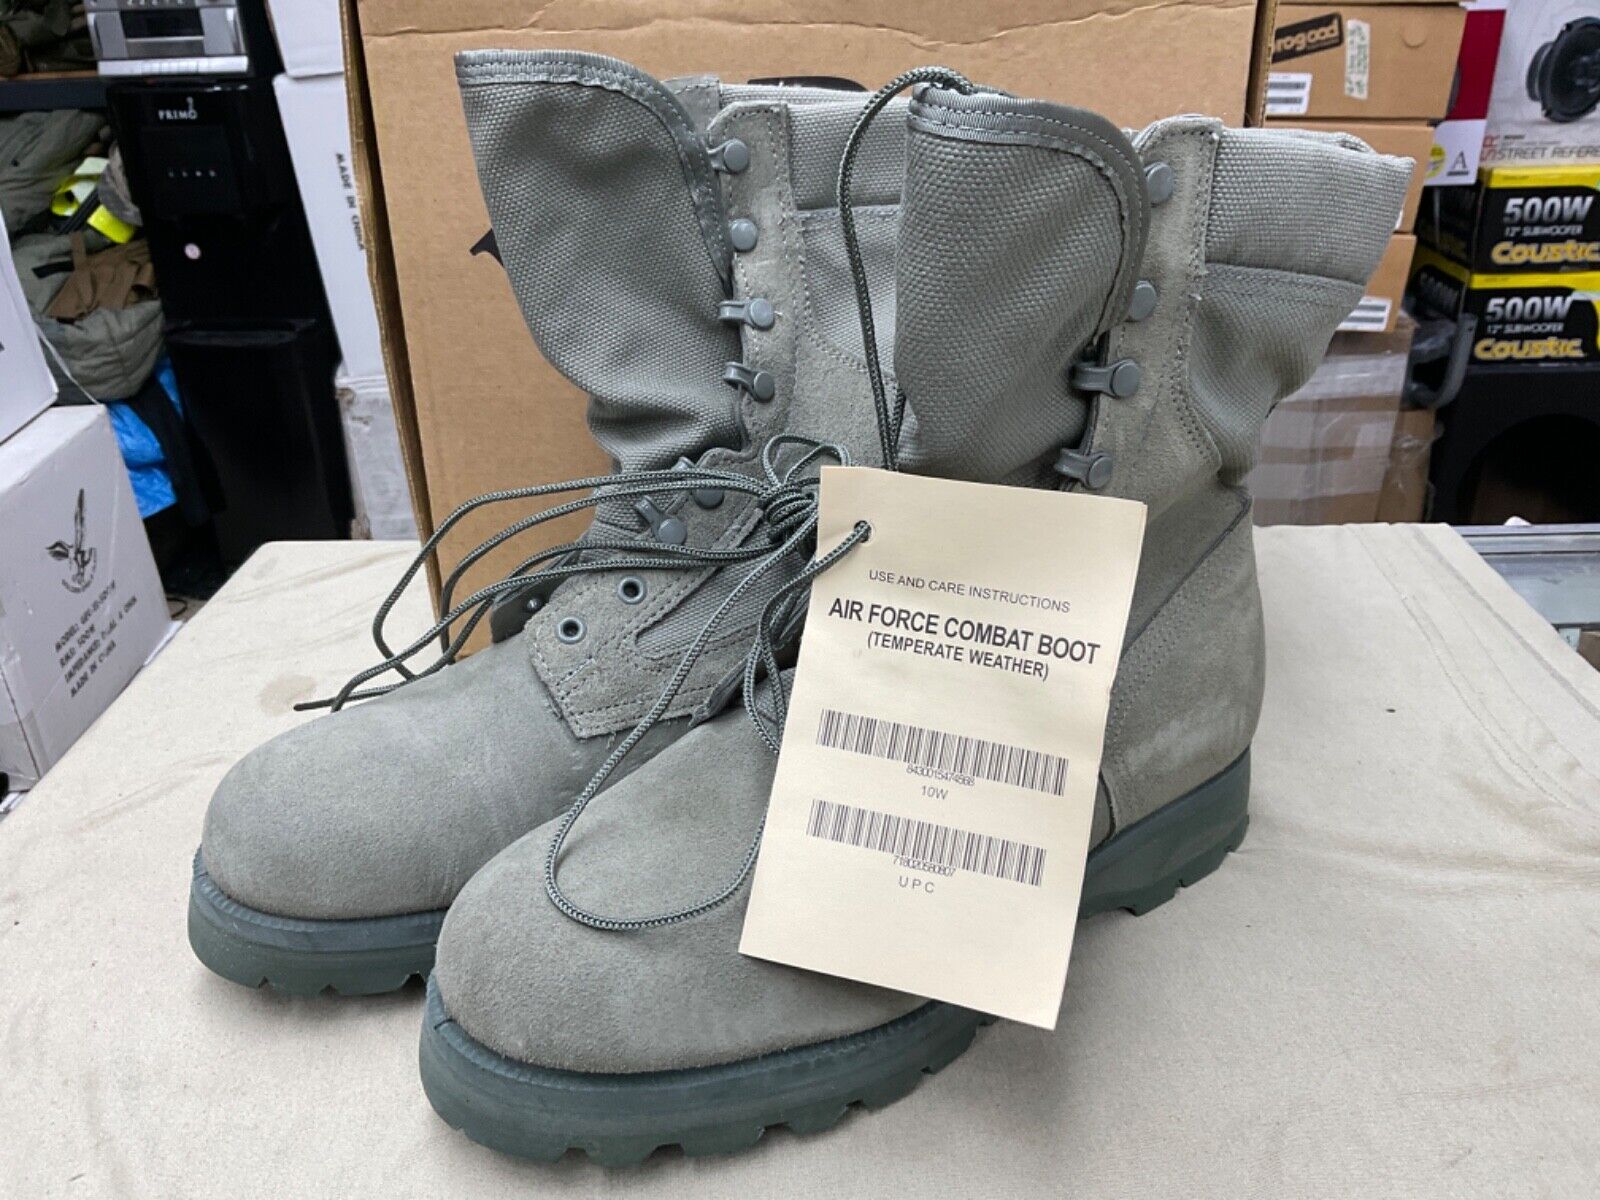 BOOTS, AFG TEMP WEATHER (SIZE 10W)